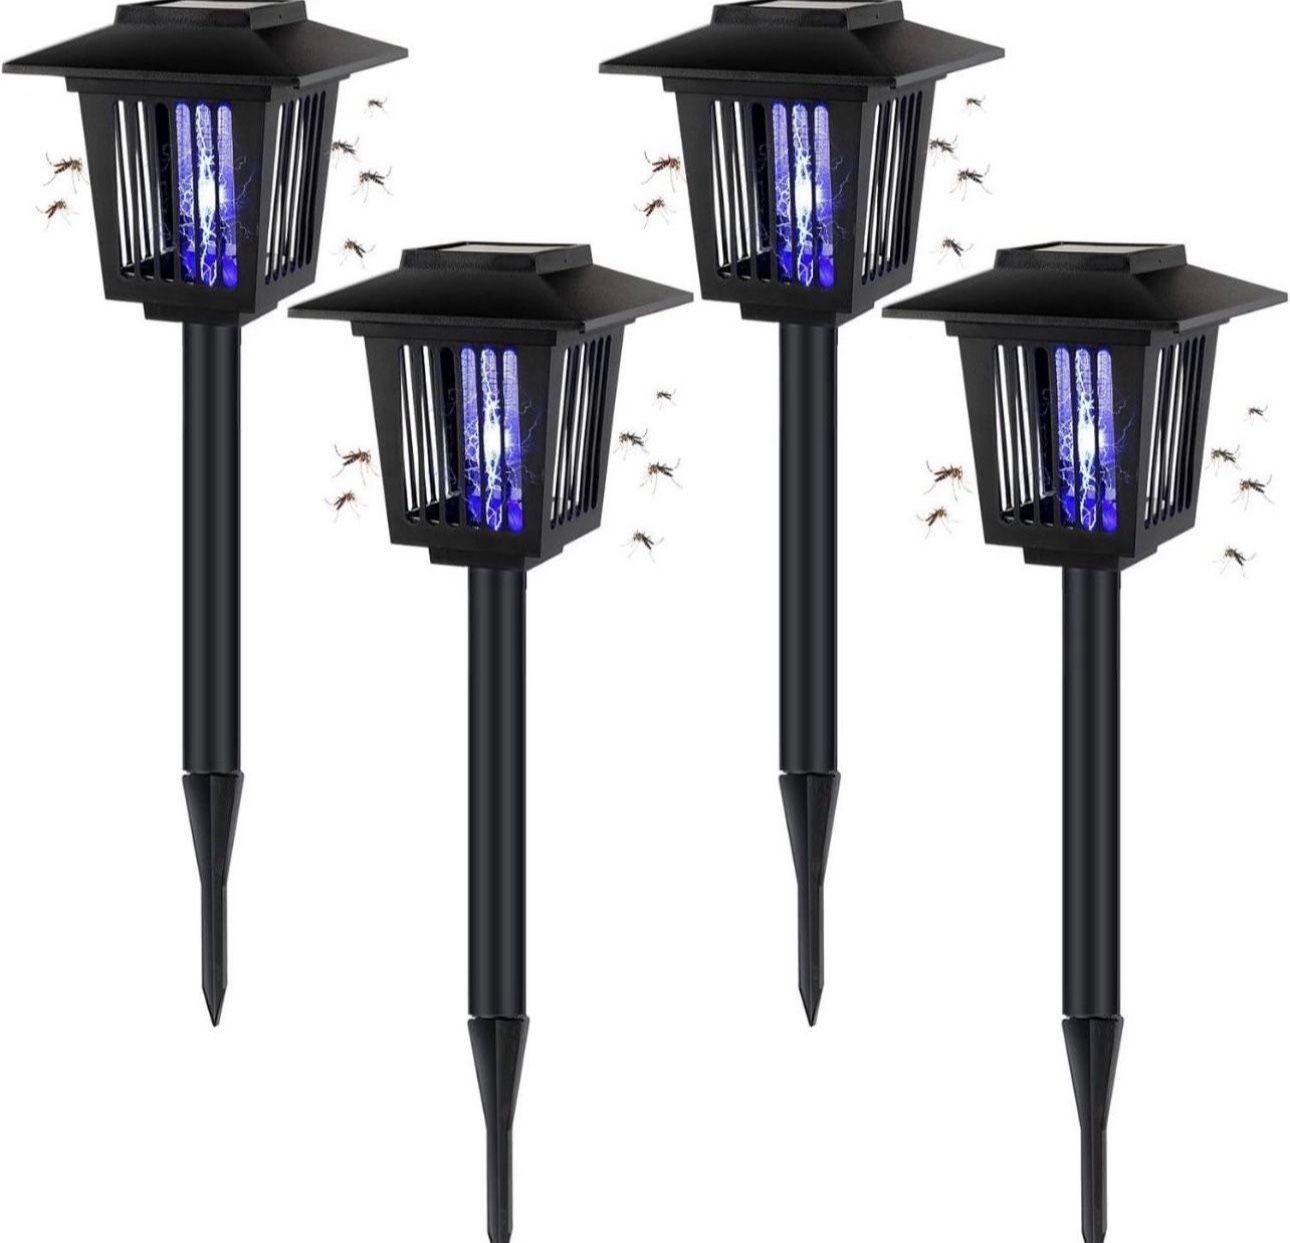 4 Pcs Solar Bug Zapper 2 in 1 Solar Insect Killer Torch Fly Mosquito Zapper Waterproof Mosquito Killer Lighting Lamp Outdoor Bug Repellent for Patio I